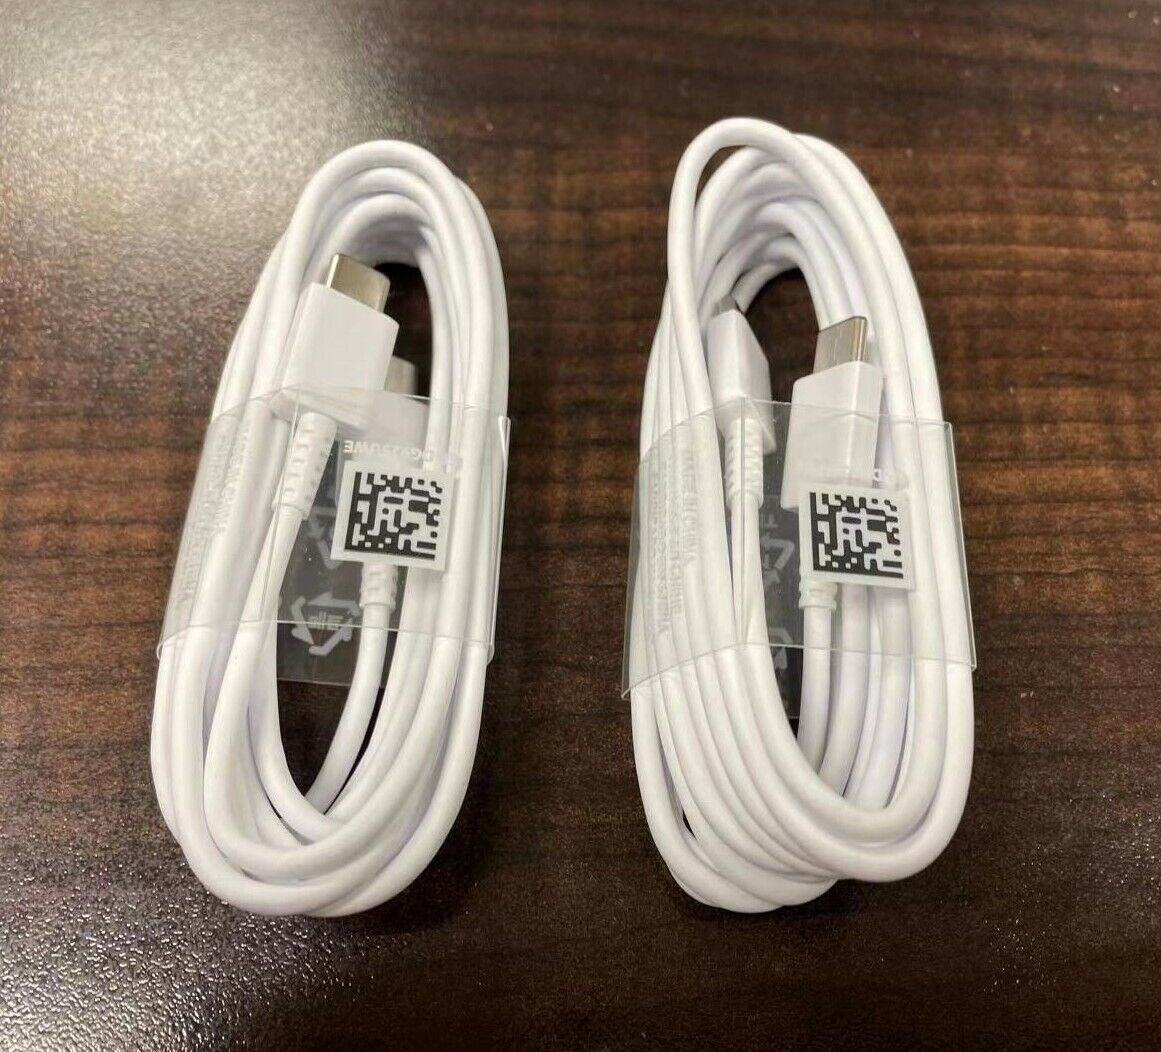 2Pack 6FT USB C to USB C Type C Fast Charger Charging Cable For MacBook iPad Pro uchoose-wireless